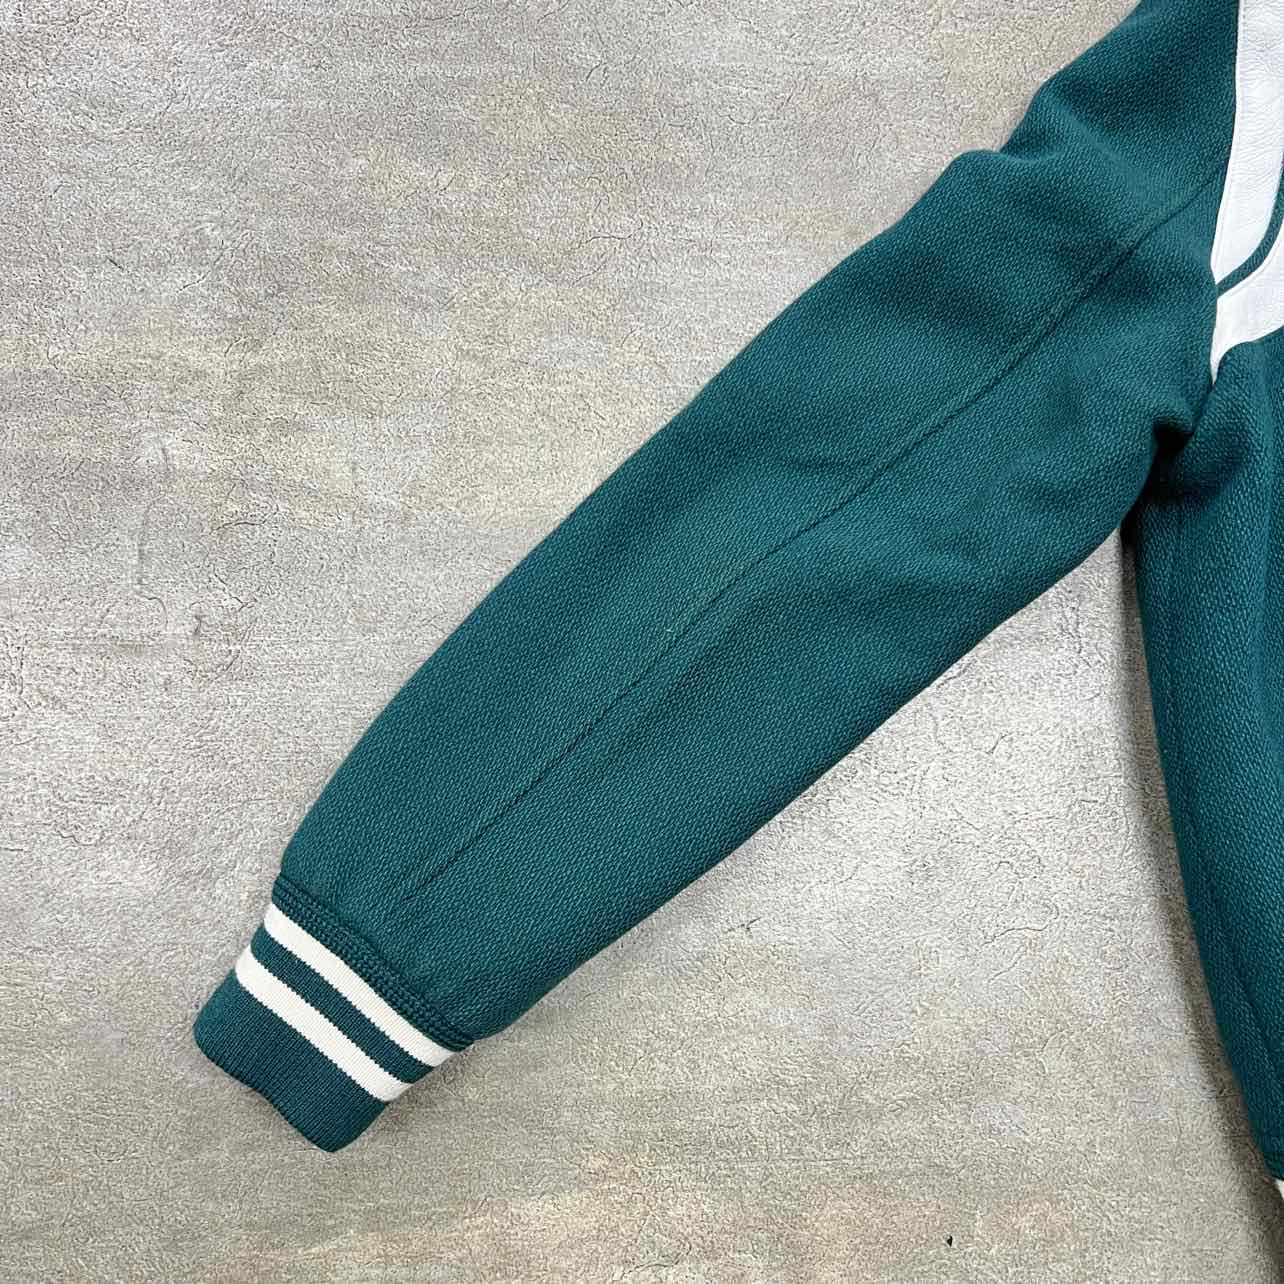 Saint Laurent Jacket &quot;TEDDY IN WOOL&quot; Green Used Size 50